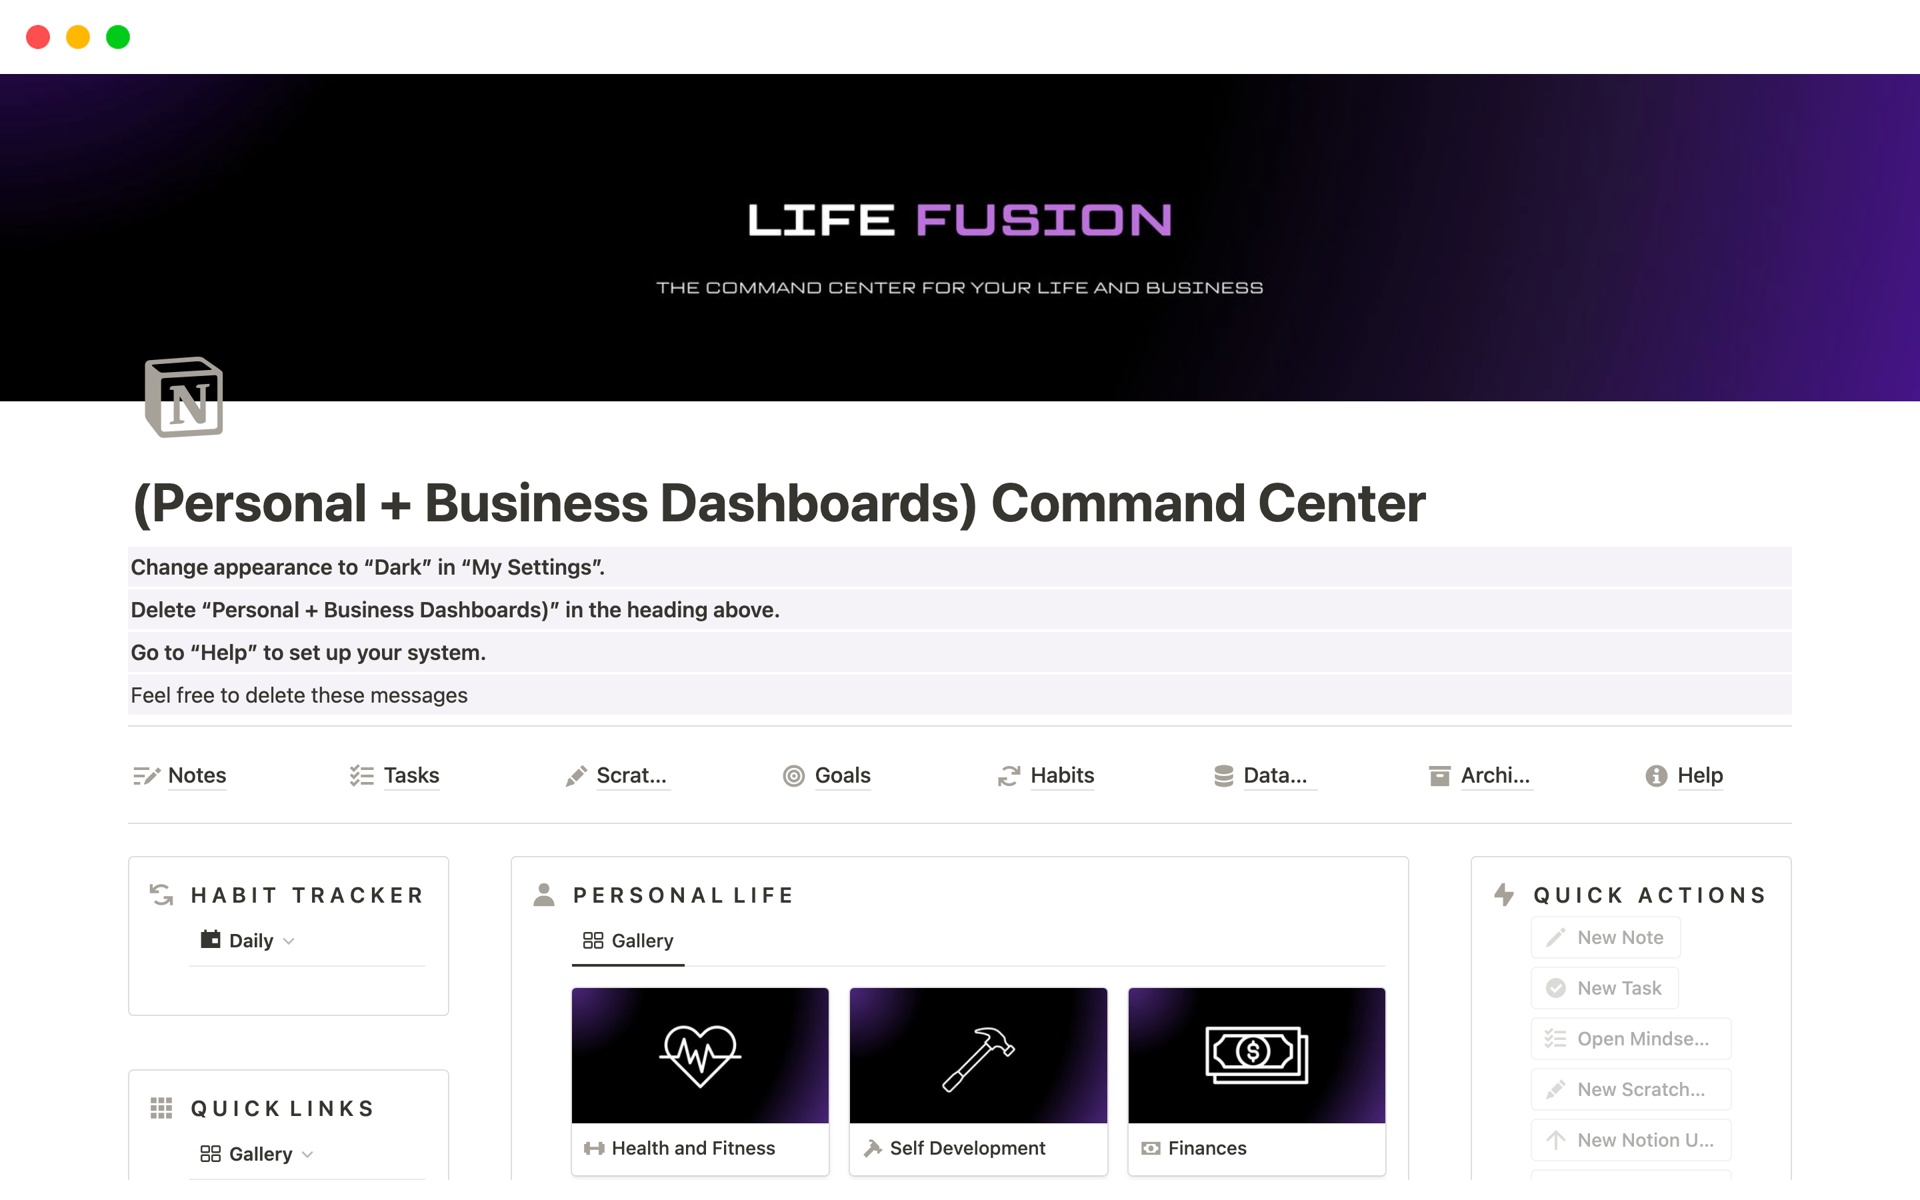 The Life Fusion system is Your Command Center For Your Life and Business.